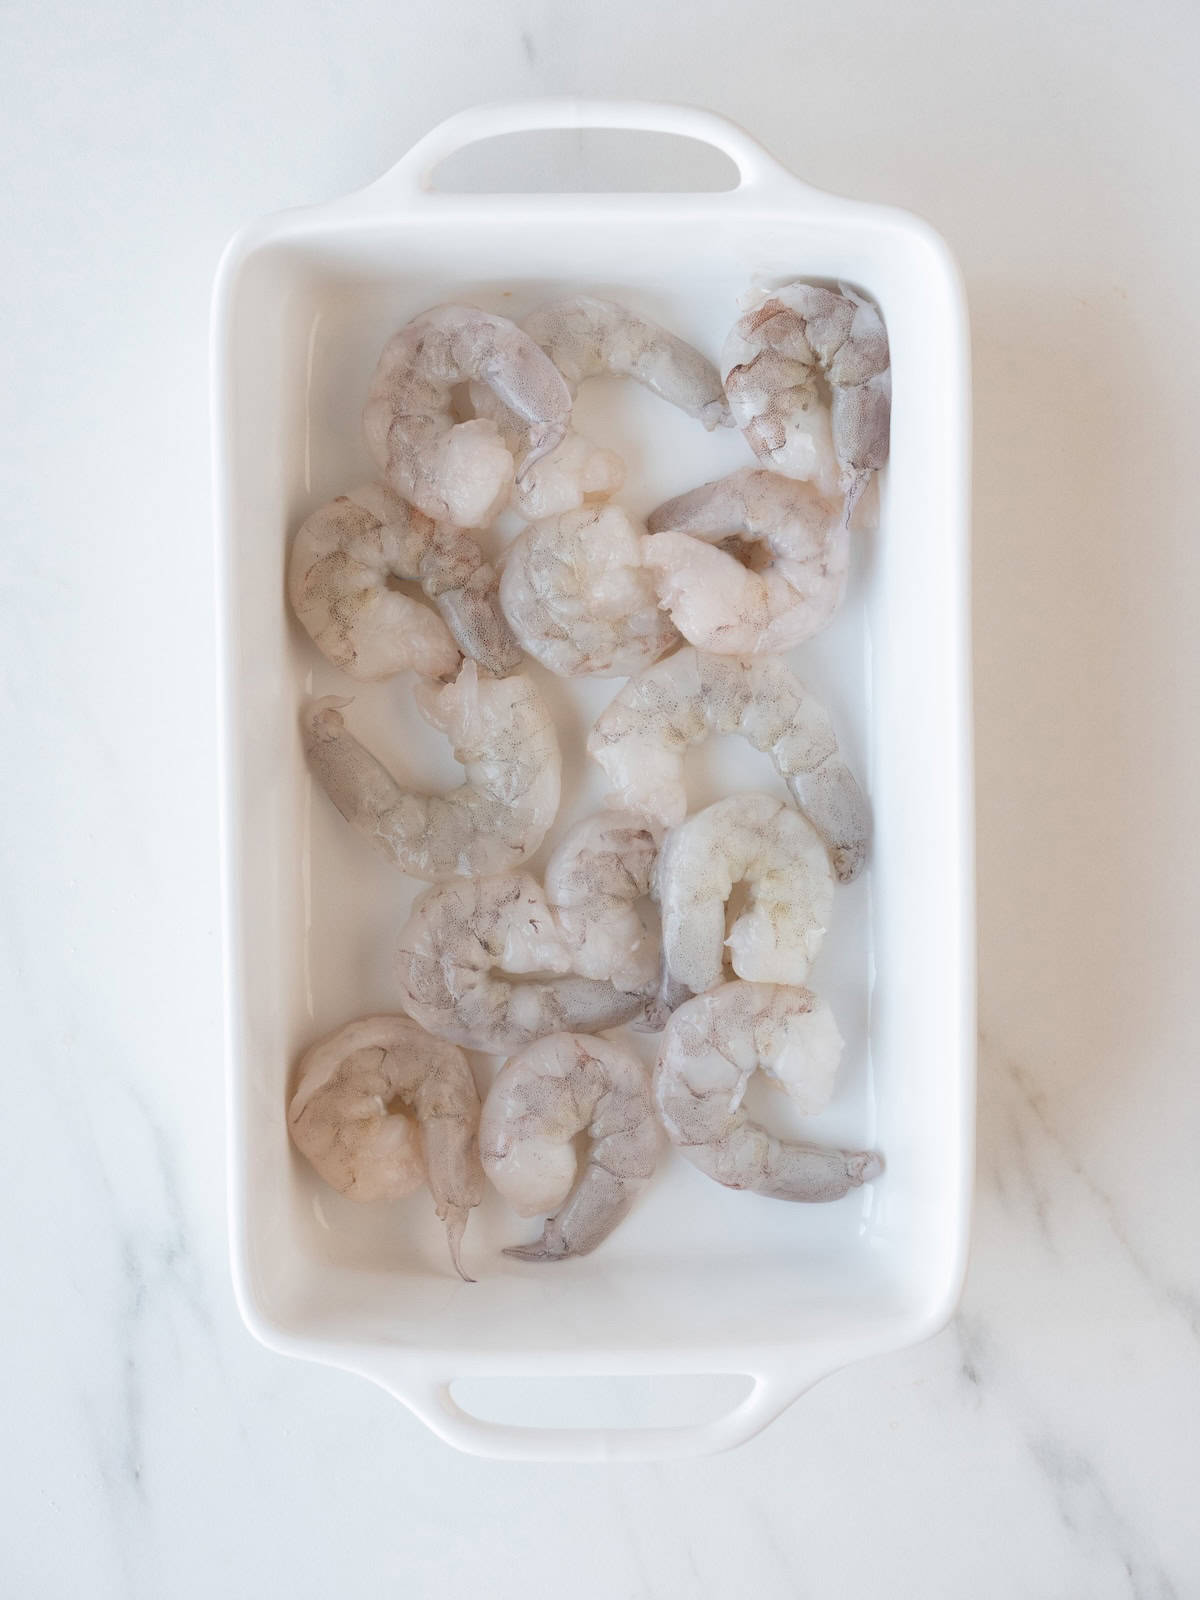 A baking dish with raw shrimp laid out to be marinated.